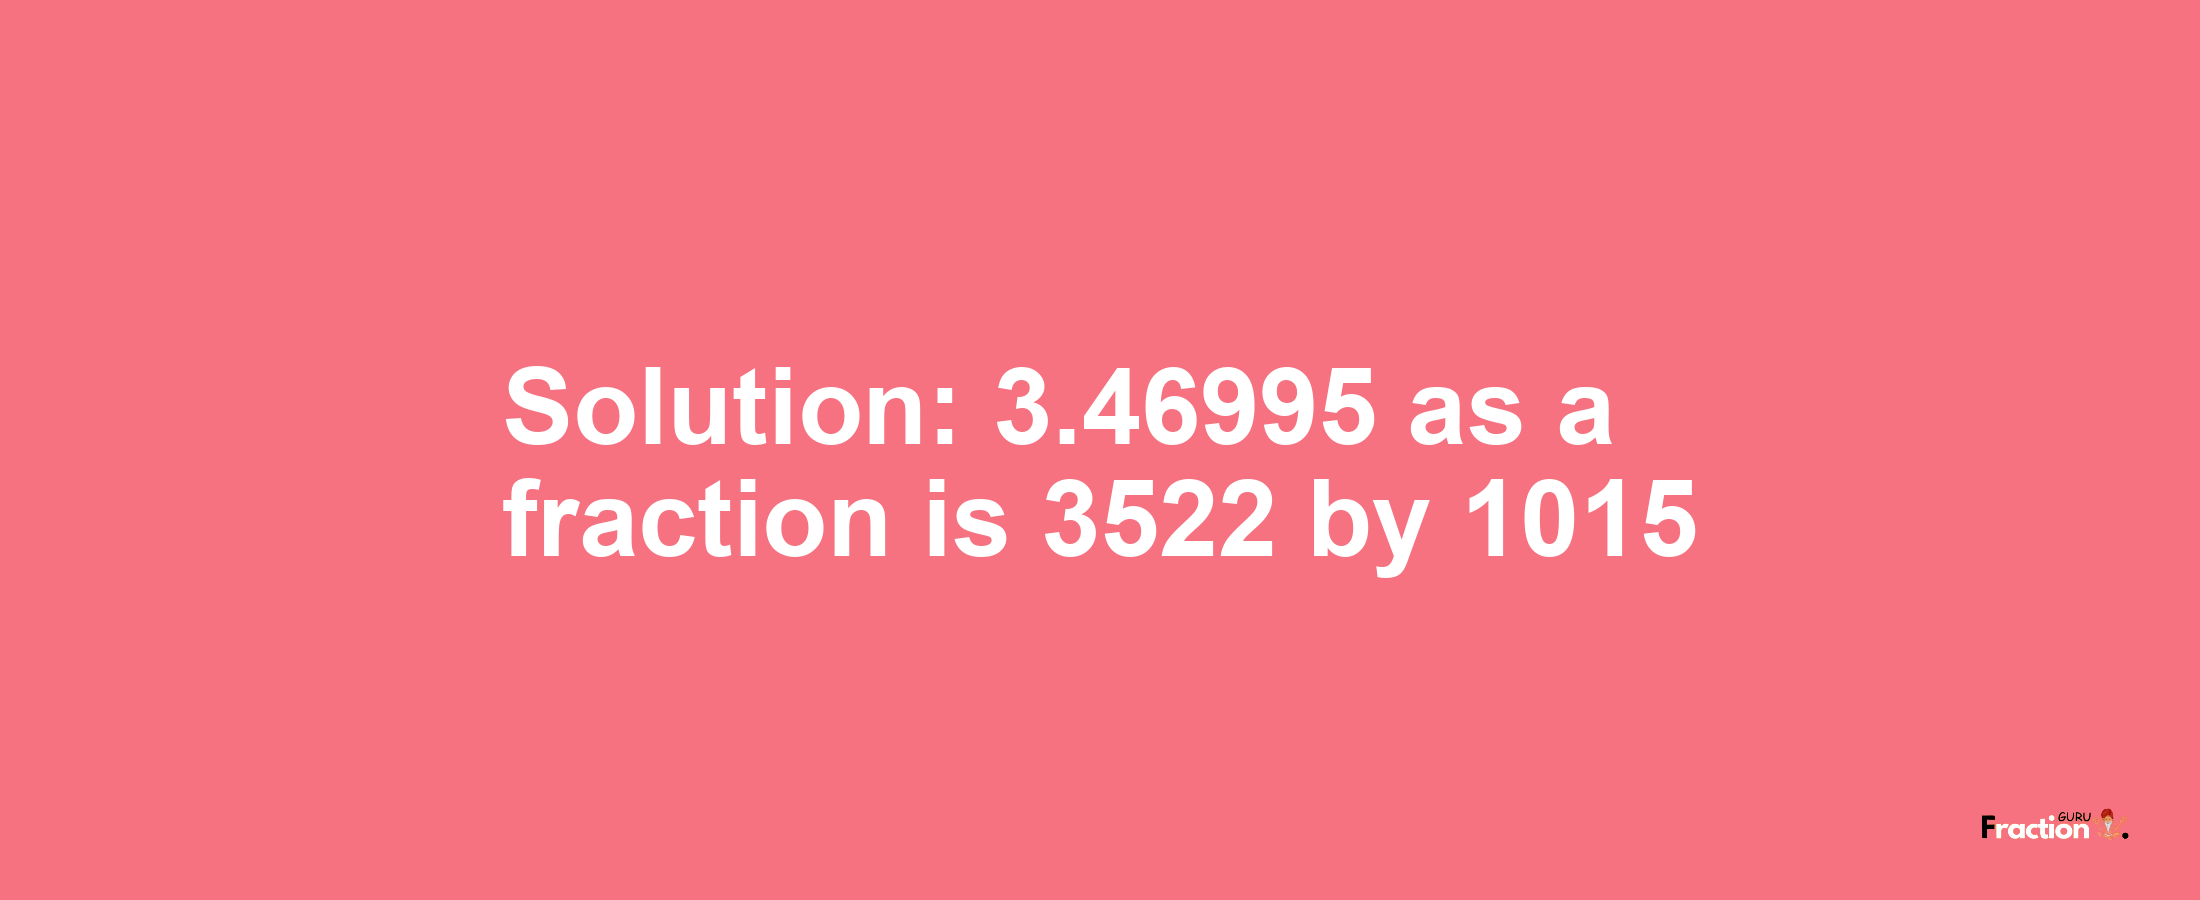 Solution:3.46995 as a fraction is 3522/1015